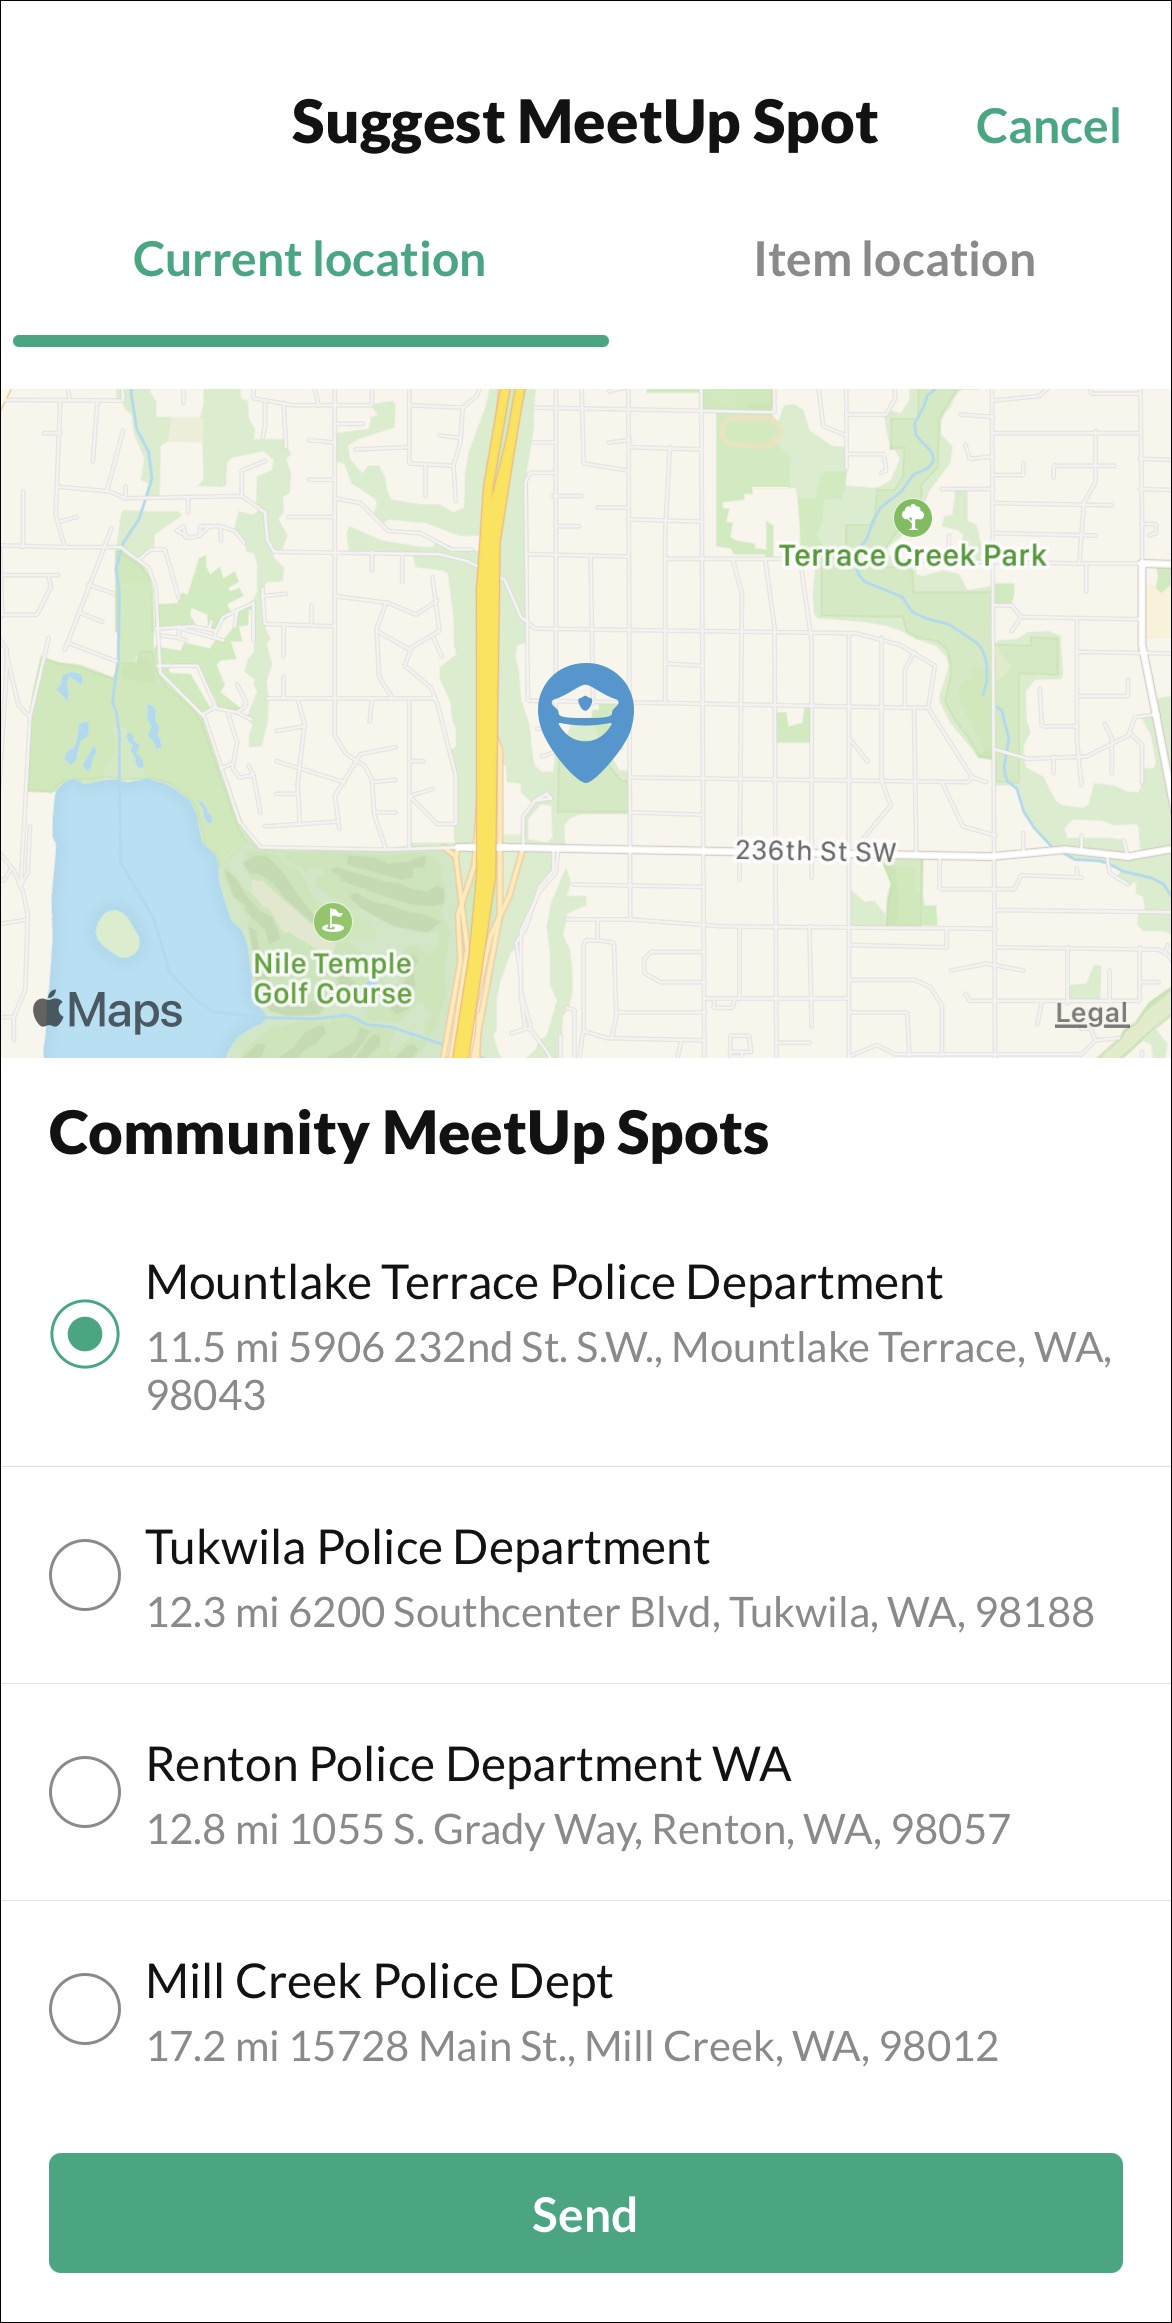 The Suggest MeetUp Spot page shows a list of 4 potential spots to choose from.